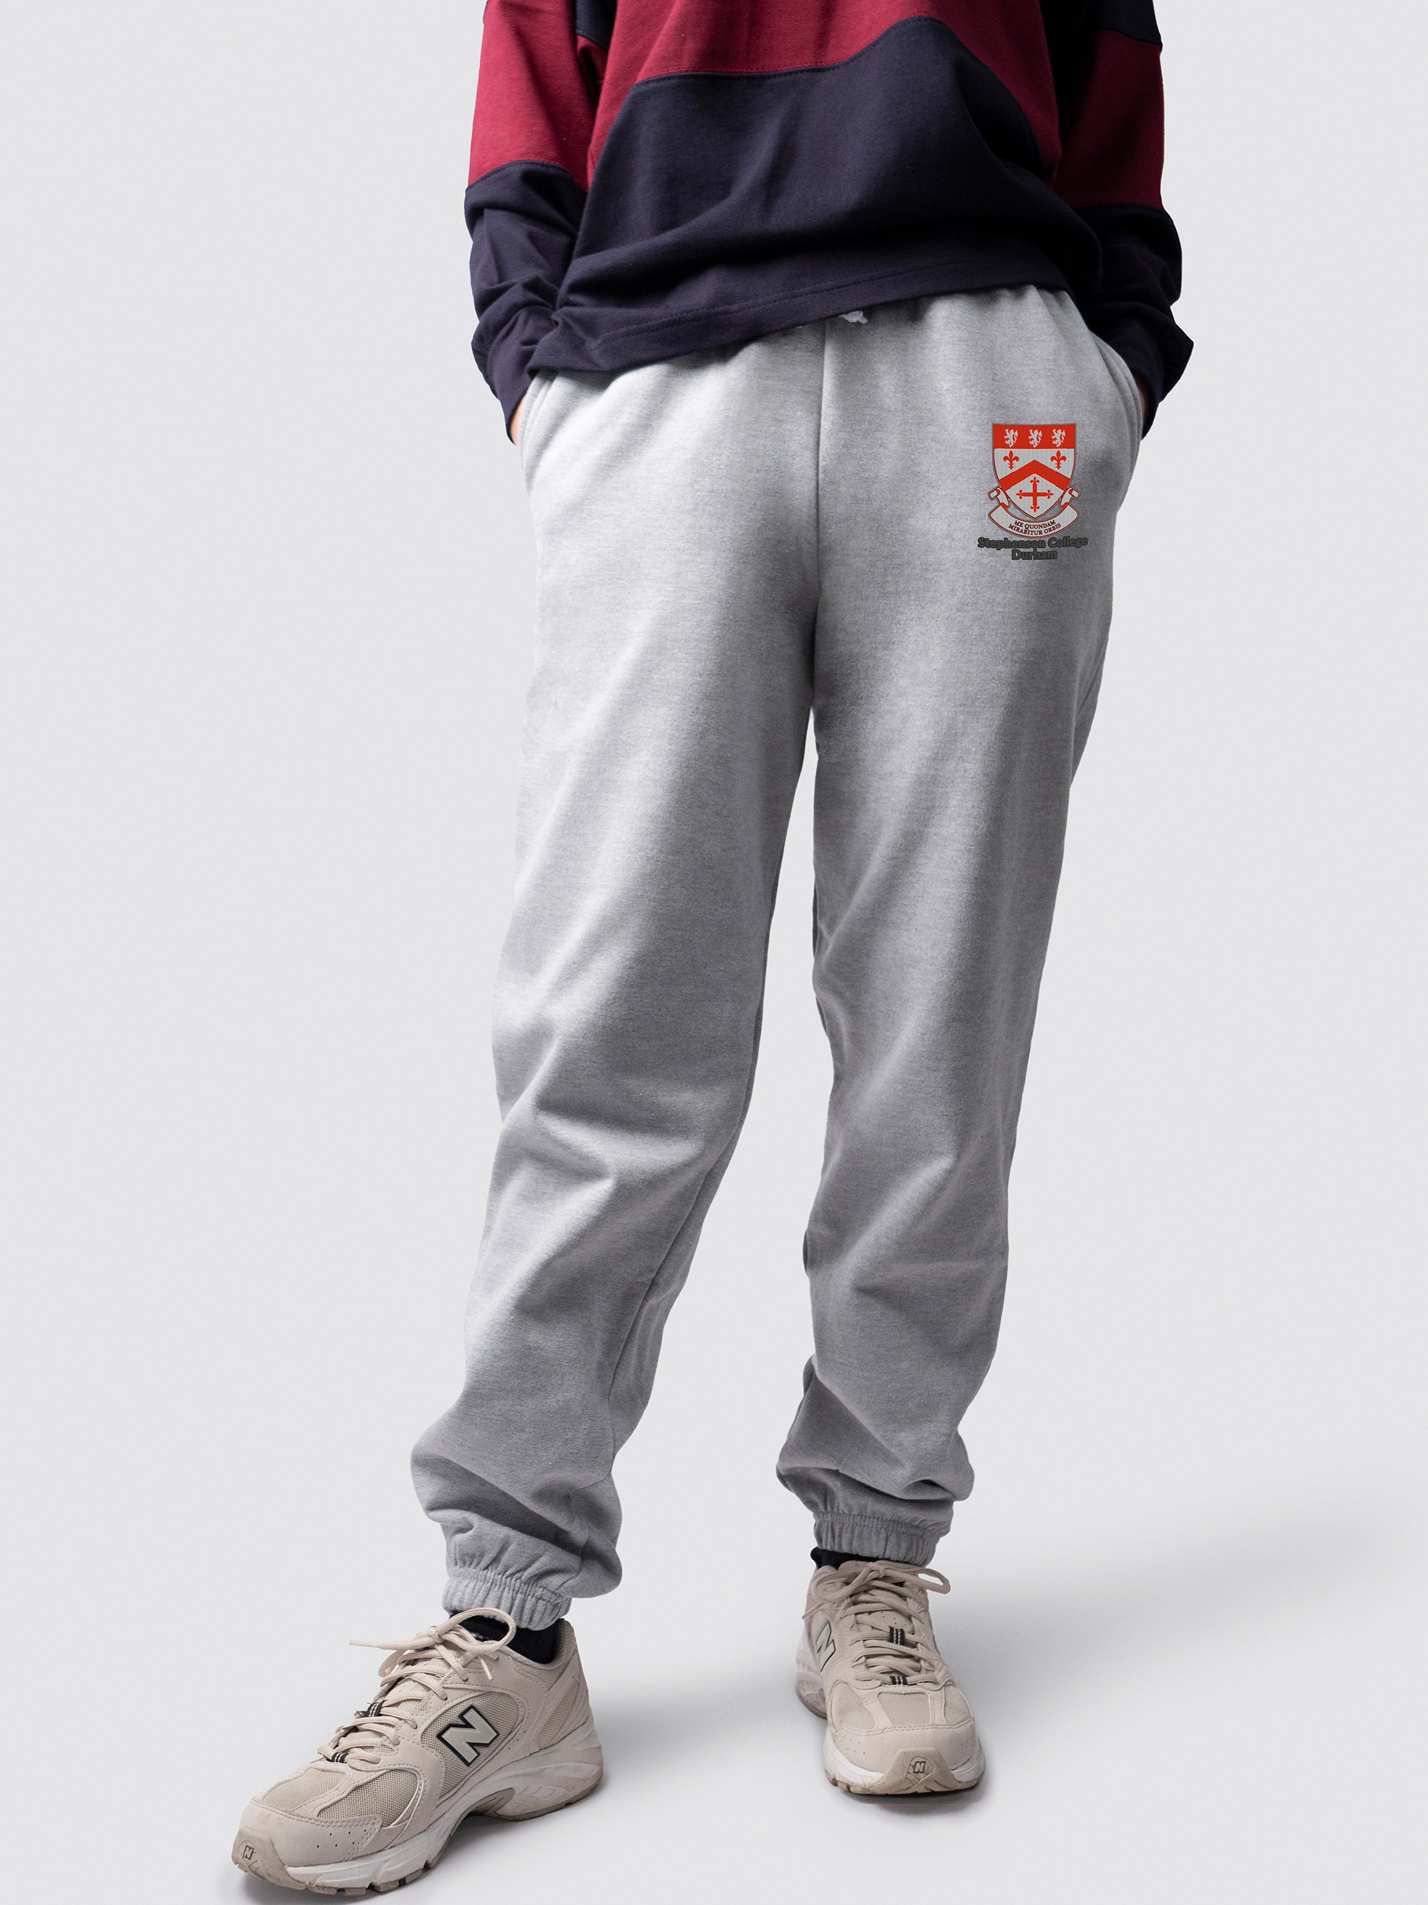 undergraduate cuffed sweatpants, made from soft cotton fabric, with Stephenson logo